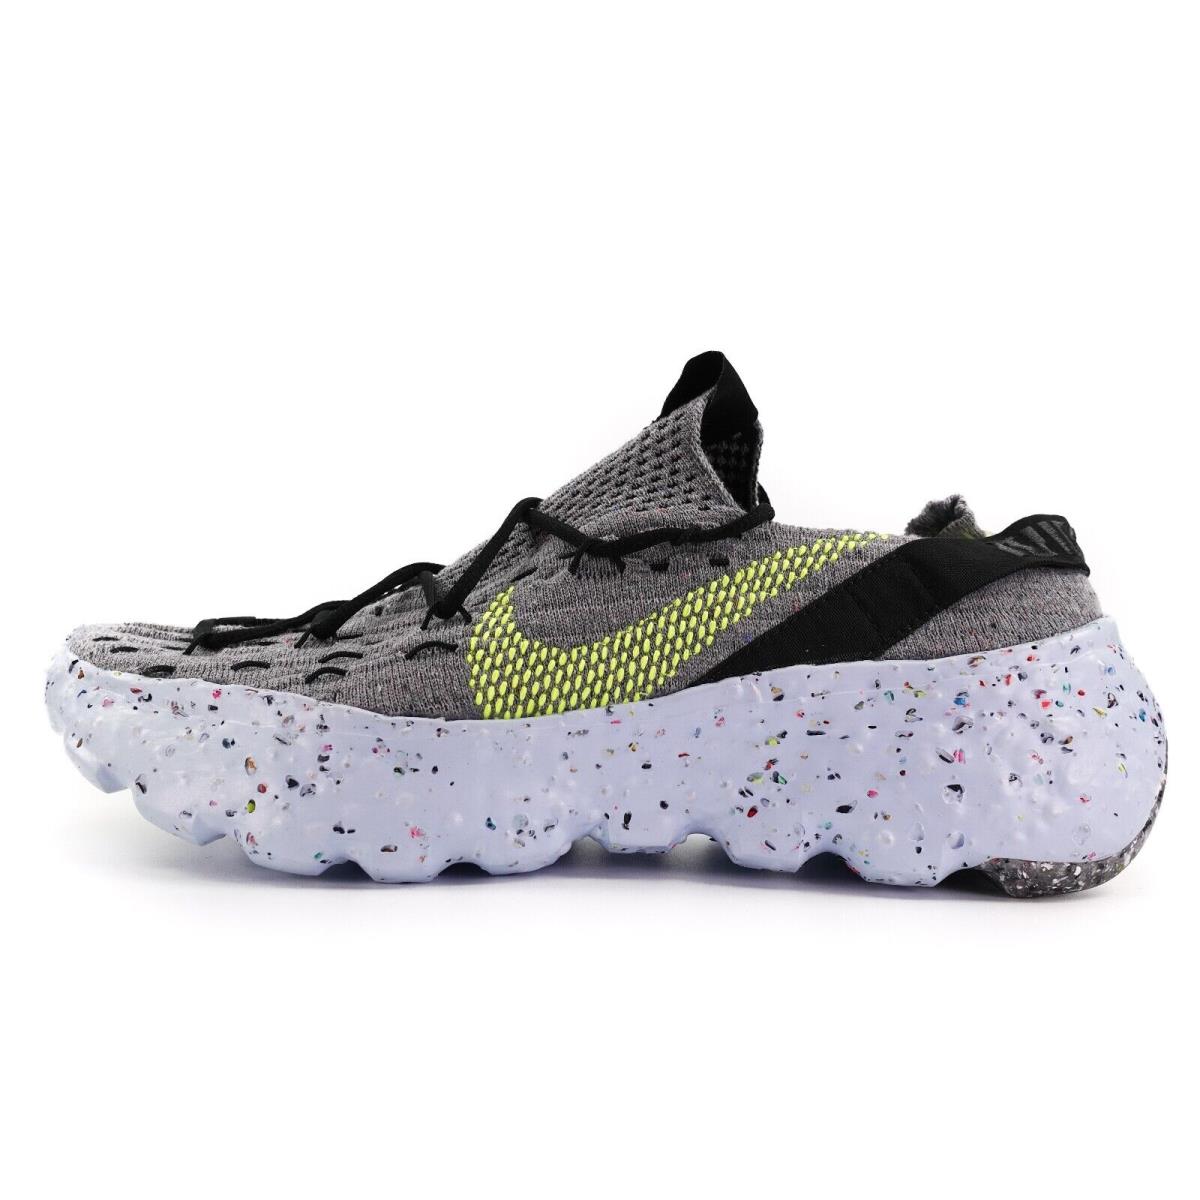 Nike Space Hippie 04 Womens Size 10.5 Lightweight Shoes CD3476-001 Mens 9